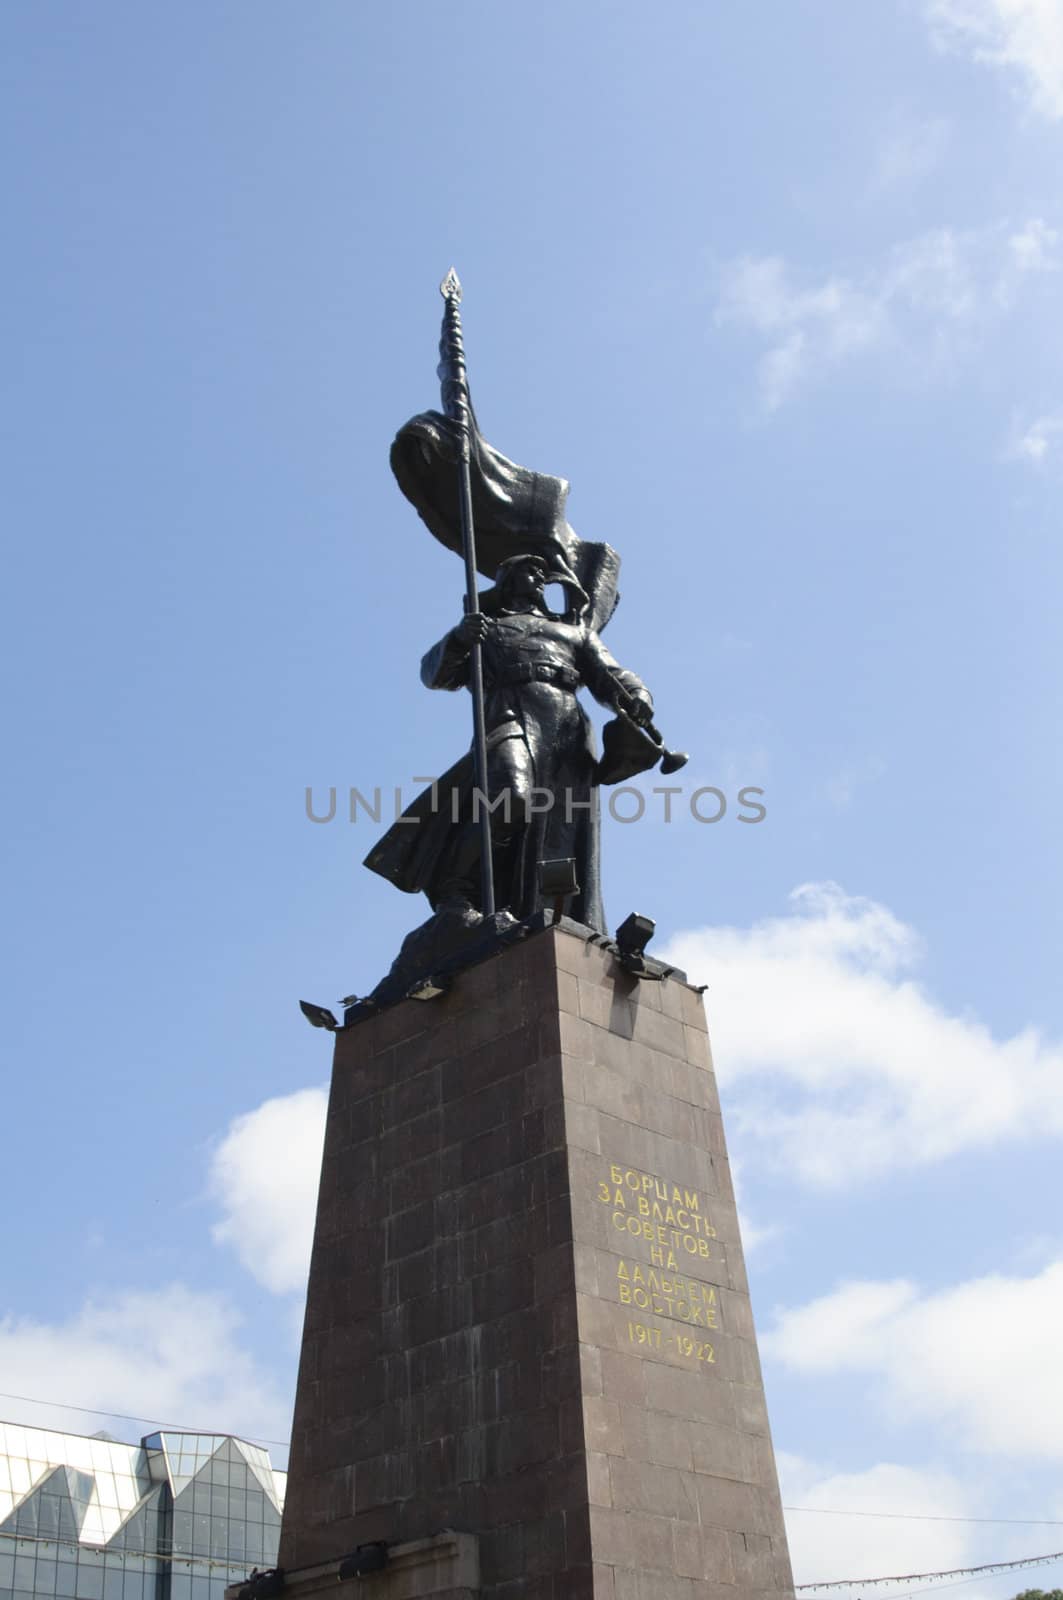 Monument to soldiers in the city of Vladivostok. The soldier with the weapon.